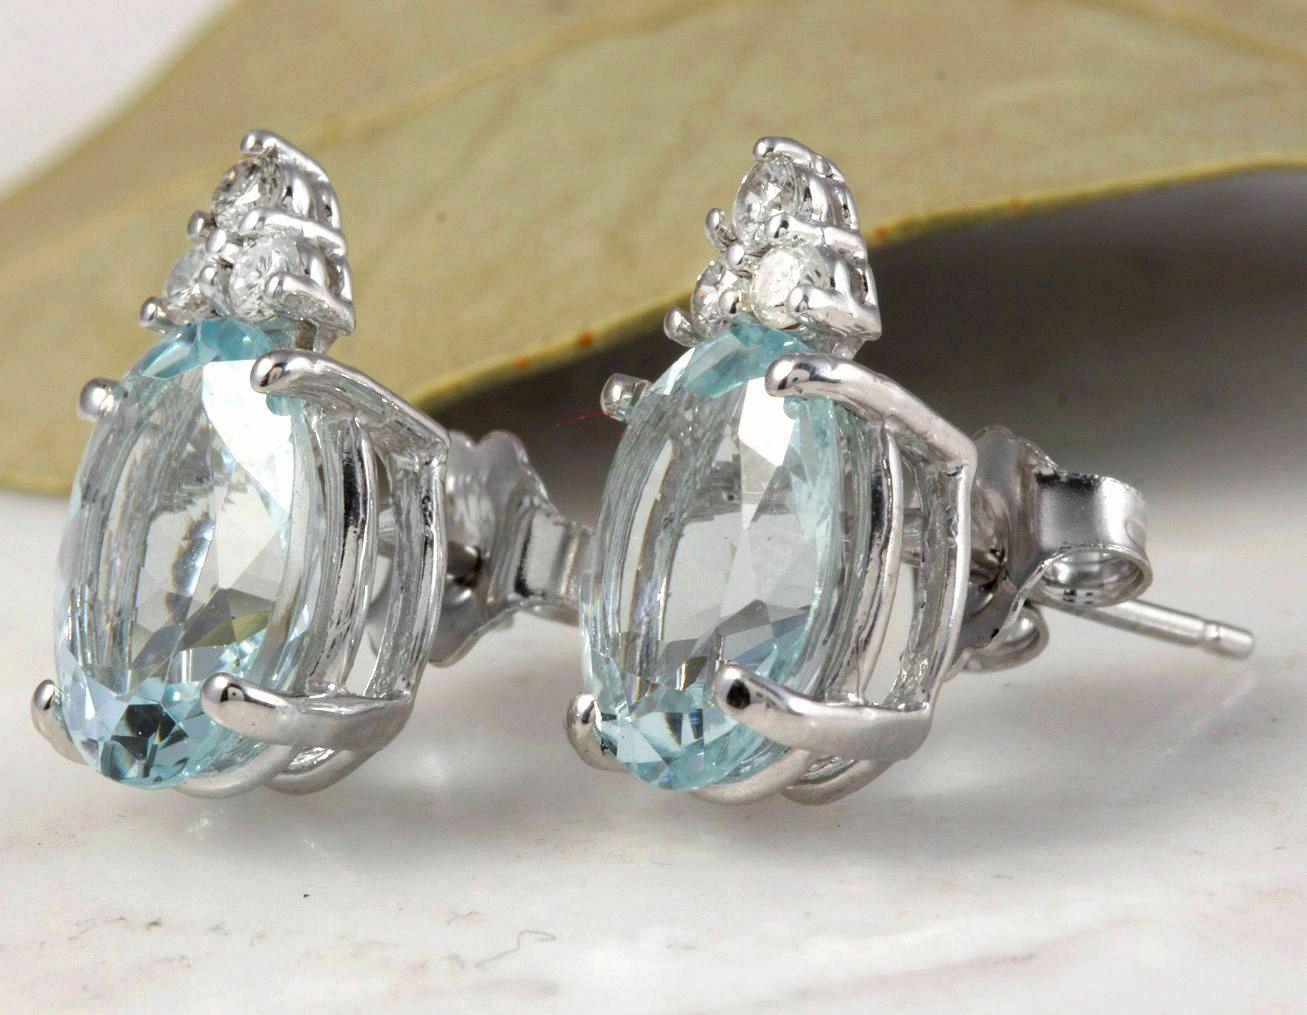 Exquisite 4.25 Carats Natural Aquamarine and Diamond 14K Solid White Gold Stud Earrings

Amazing looking piece!

Total Natural Round Cut White Diamonds Weight: Approx. 0.20 Carats (color G-H / Clarity SI)

Total Natural Oval Cut Blue Aquamarines